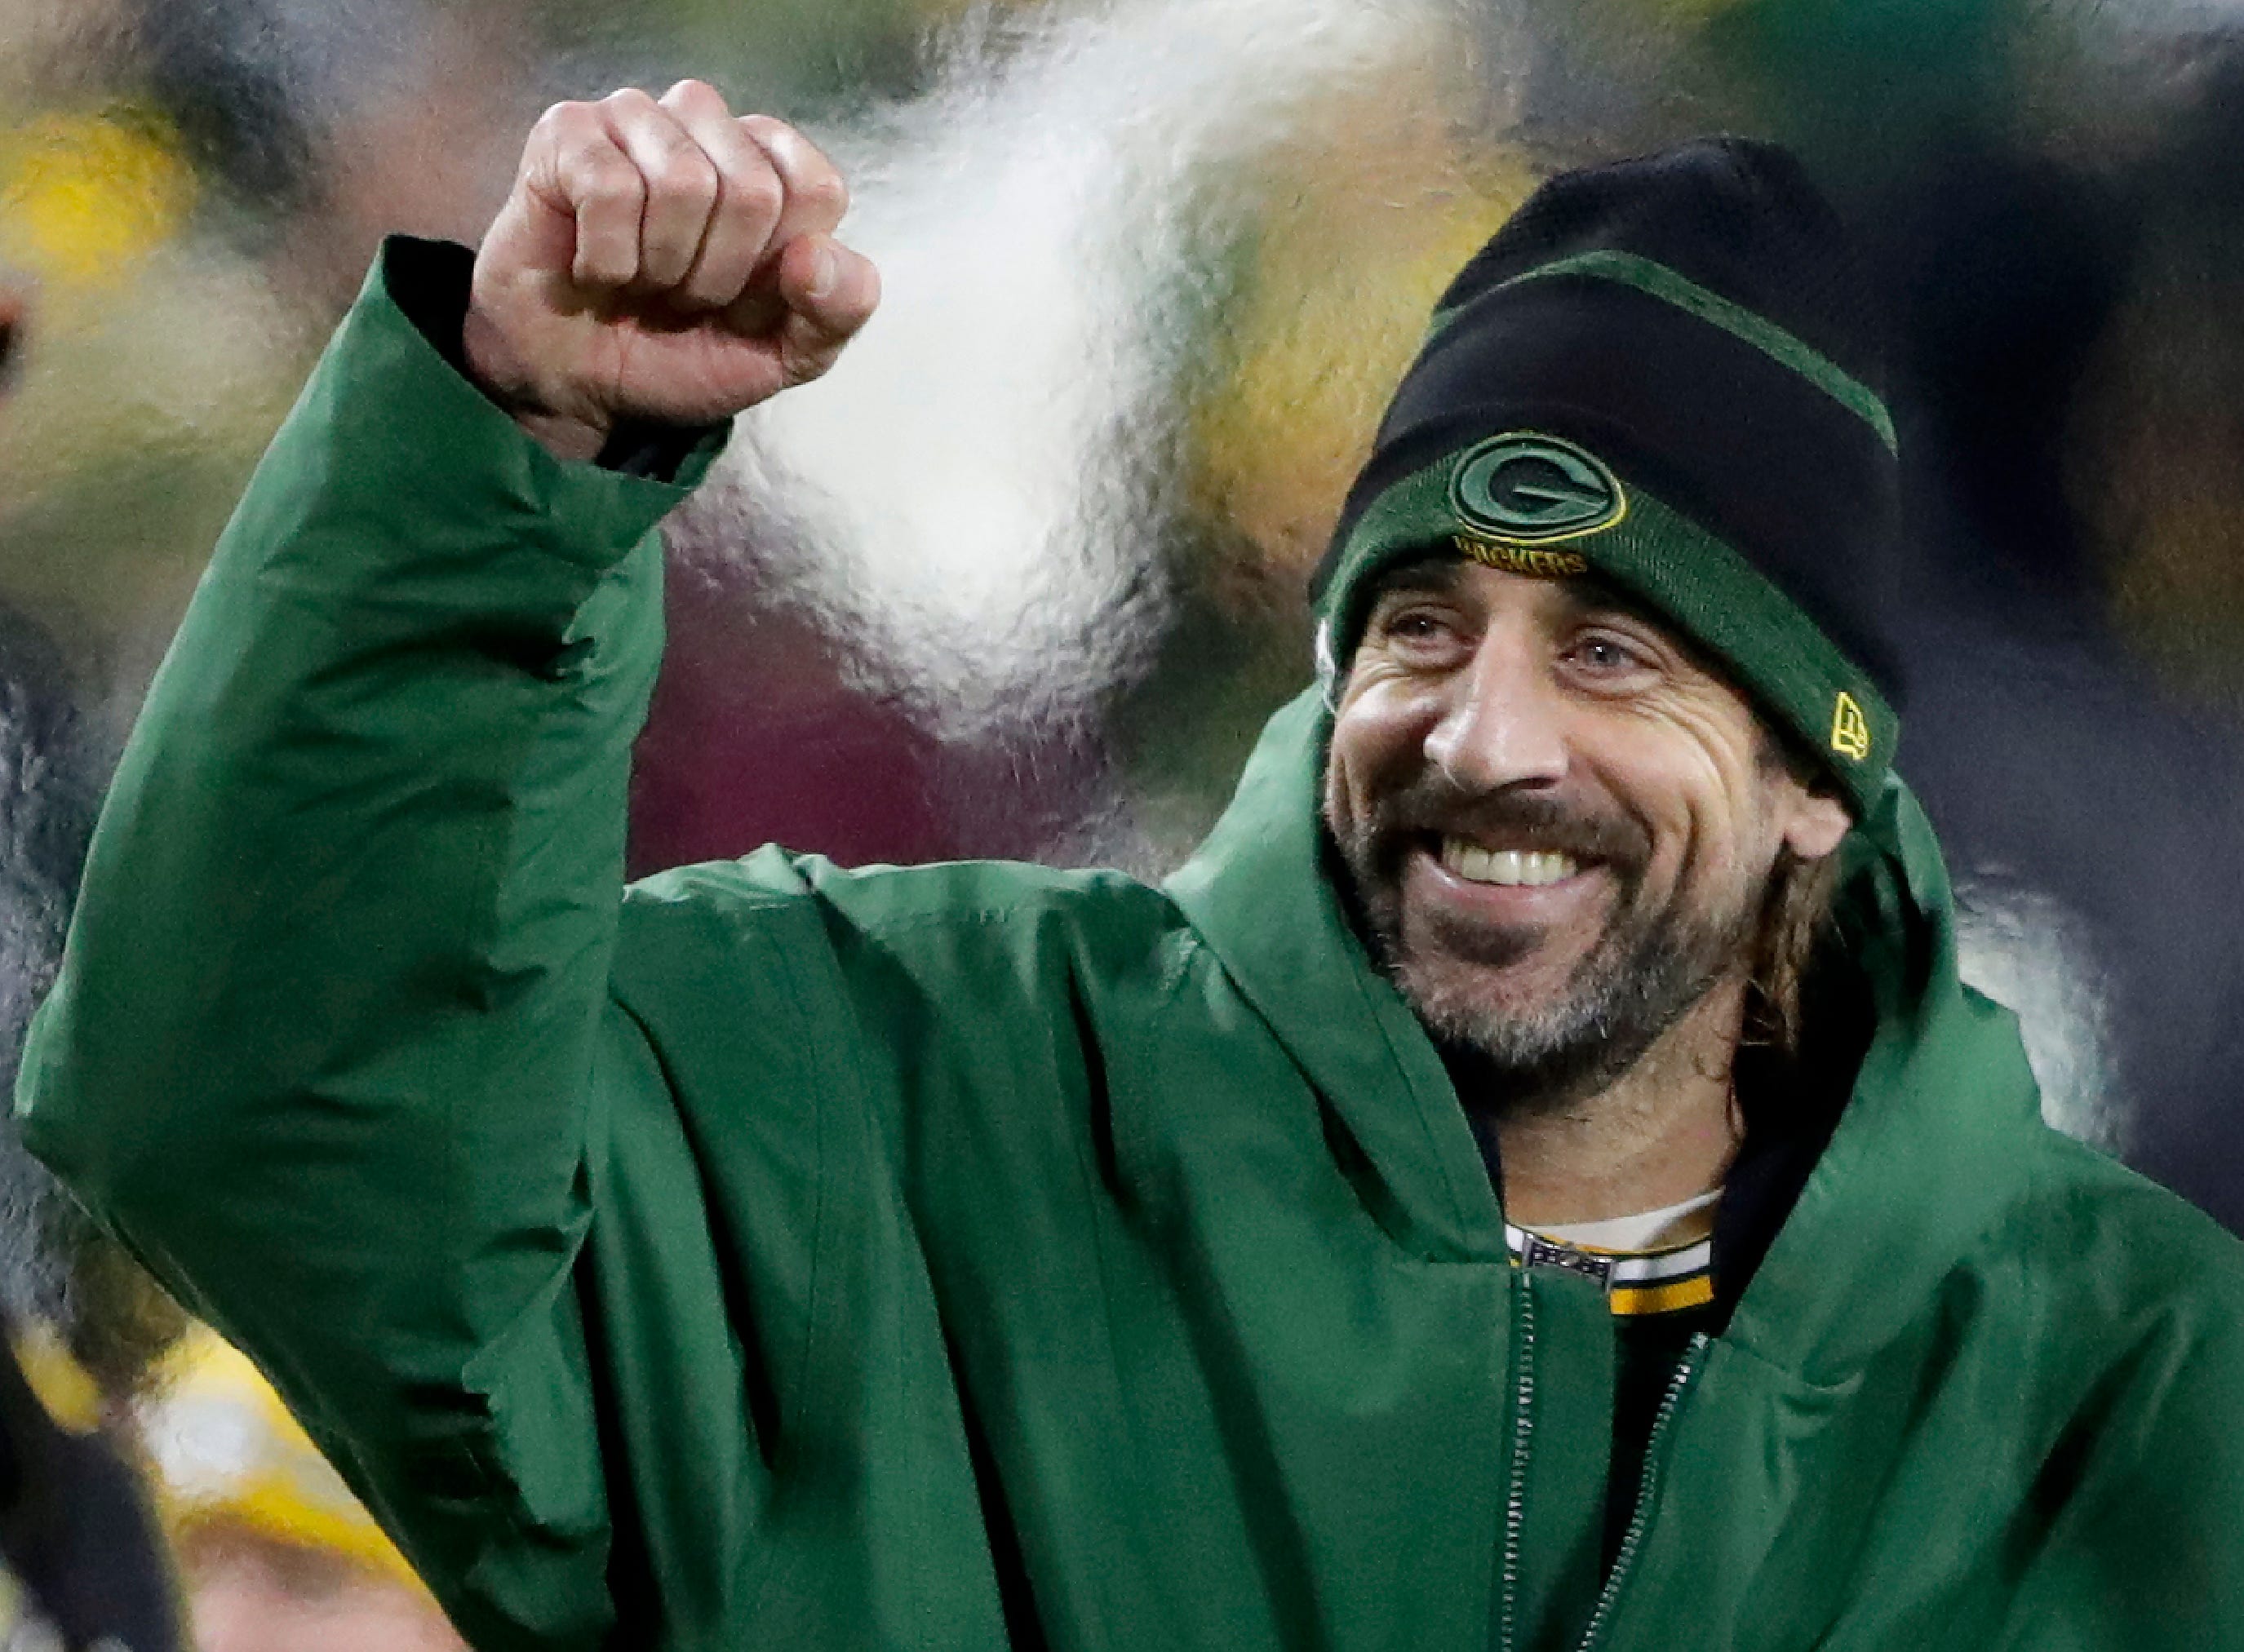 Green Bay Packers quarterback Aaron Rodgers (12) following the Packers' victory over the Chicago Bears during their football game on Sunday, Dec. 12, 2021, at Lambeau Field in Green Bay, Wis.